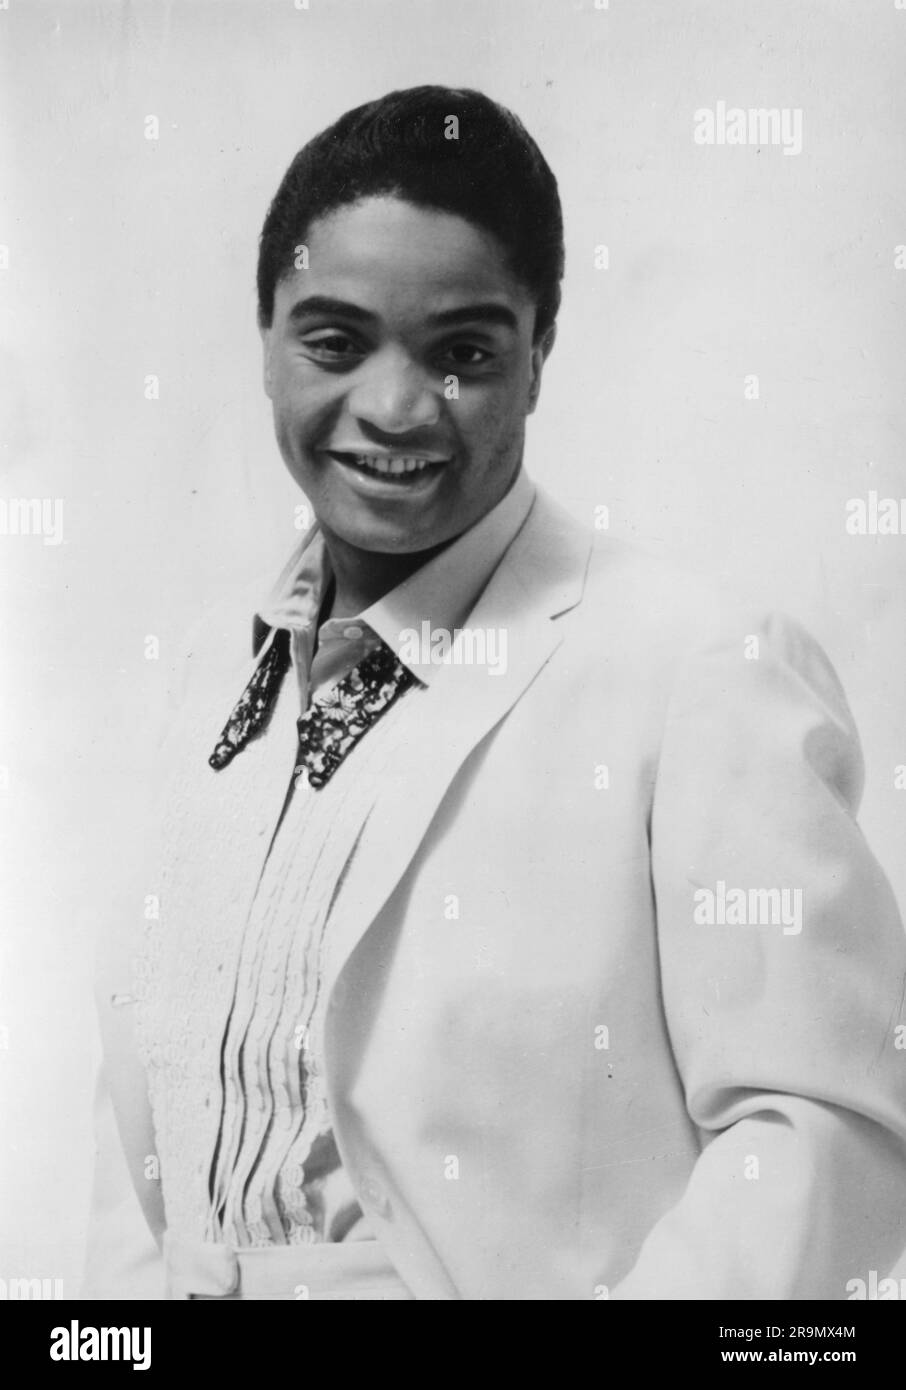 Wilson, Jackie, 9.6.1934 - 21.1,1984, American Rhythm and blues Singer, PR Photograph, 1960s, ADDITIONAL-RIGHTS-CLEARANCE-INFO-NOT-AVAILABLE Foto Stock